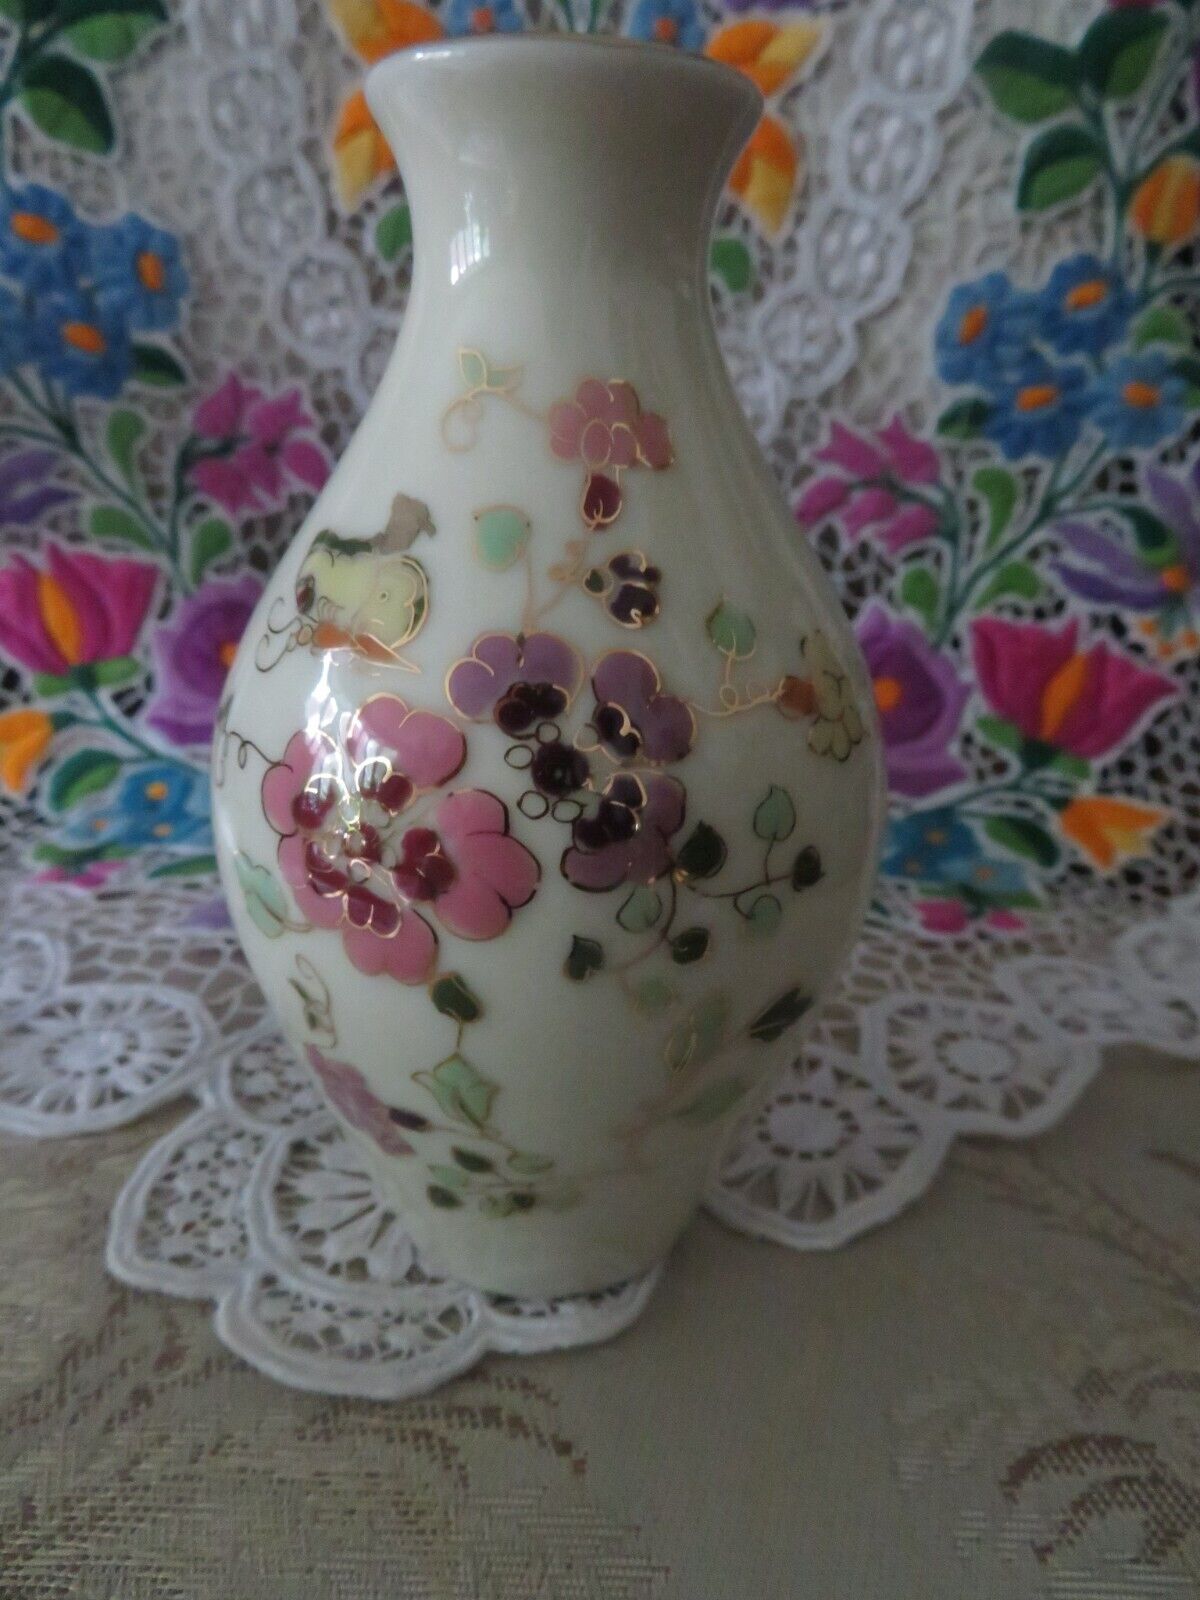  Zsolnay Vintage Hand Painted Porcelain Floral  Vase Laced with 24K Gold